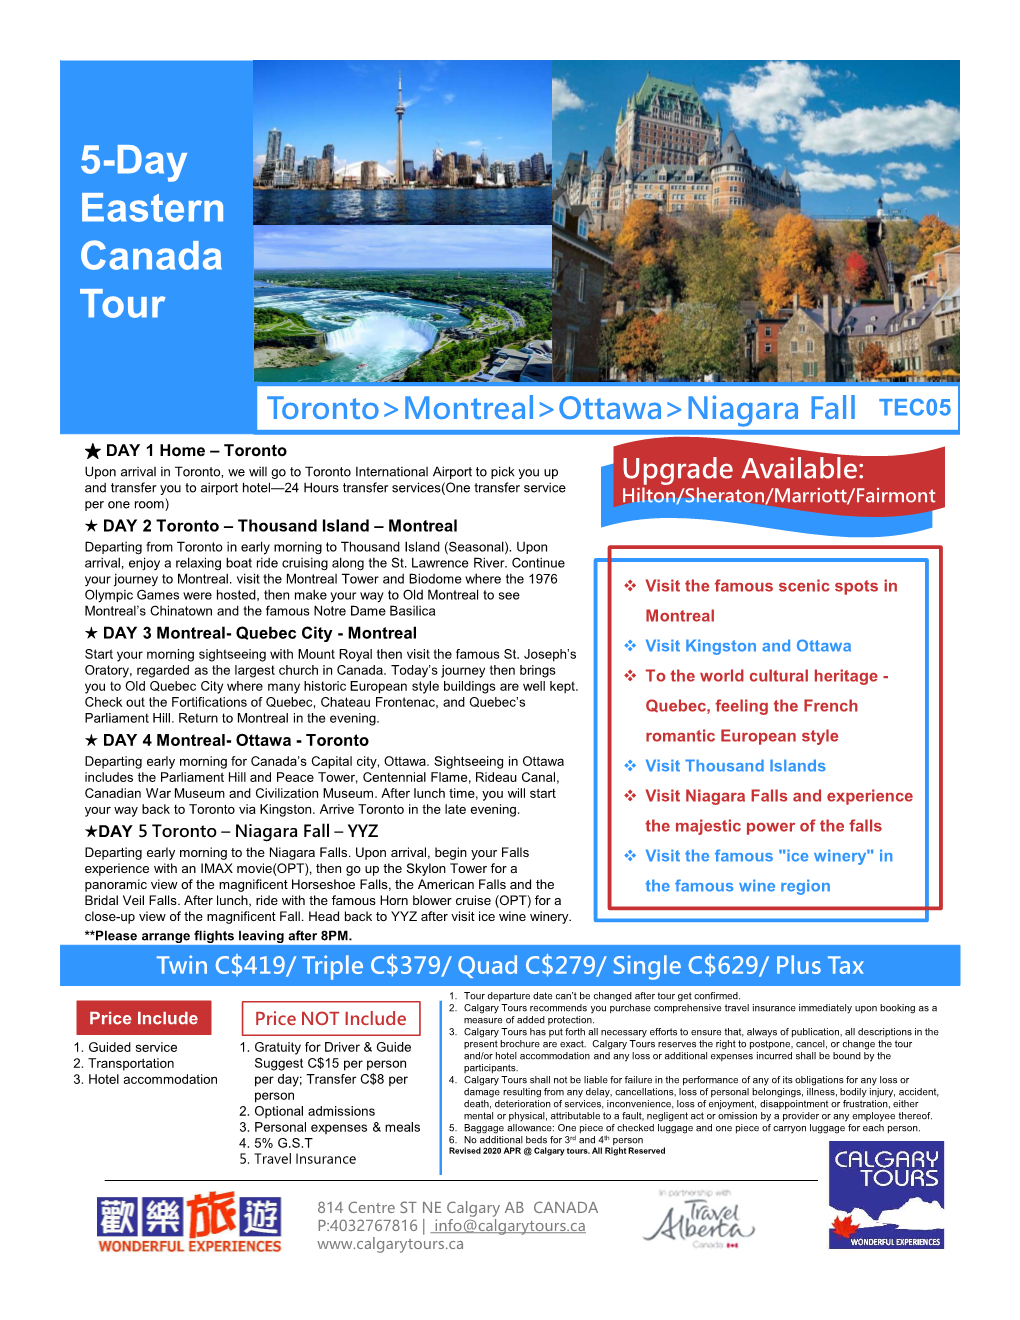 5-Day Eastern Canada Tour